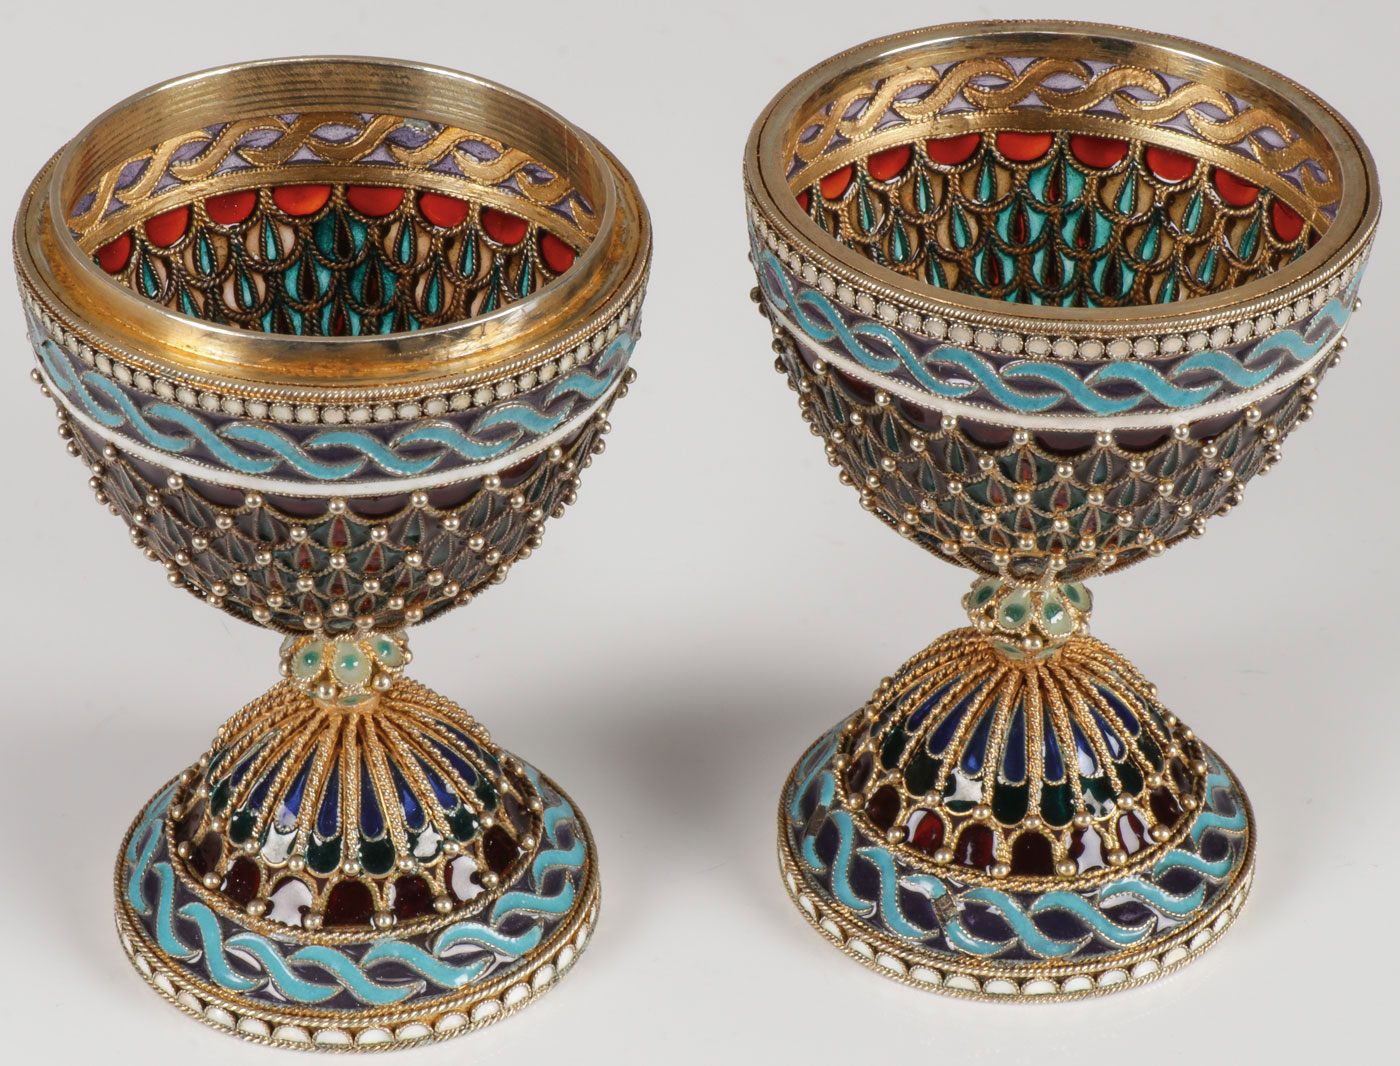 IMPRESSIVE RUSSIAN SILVER & ENAMEL EGG MOSCOW 190 - Image 2 of 3